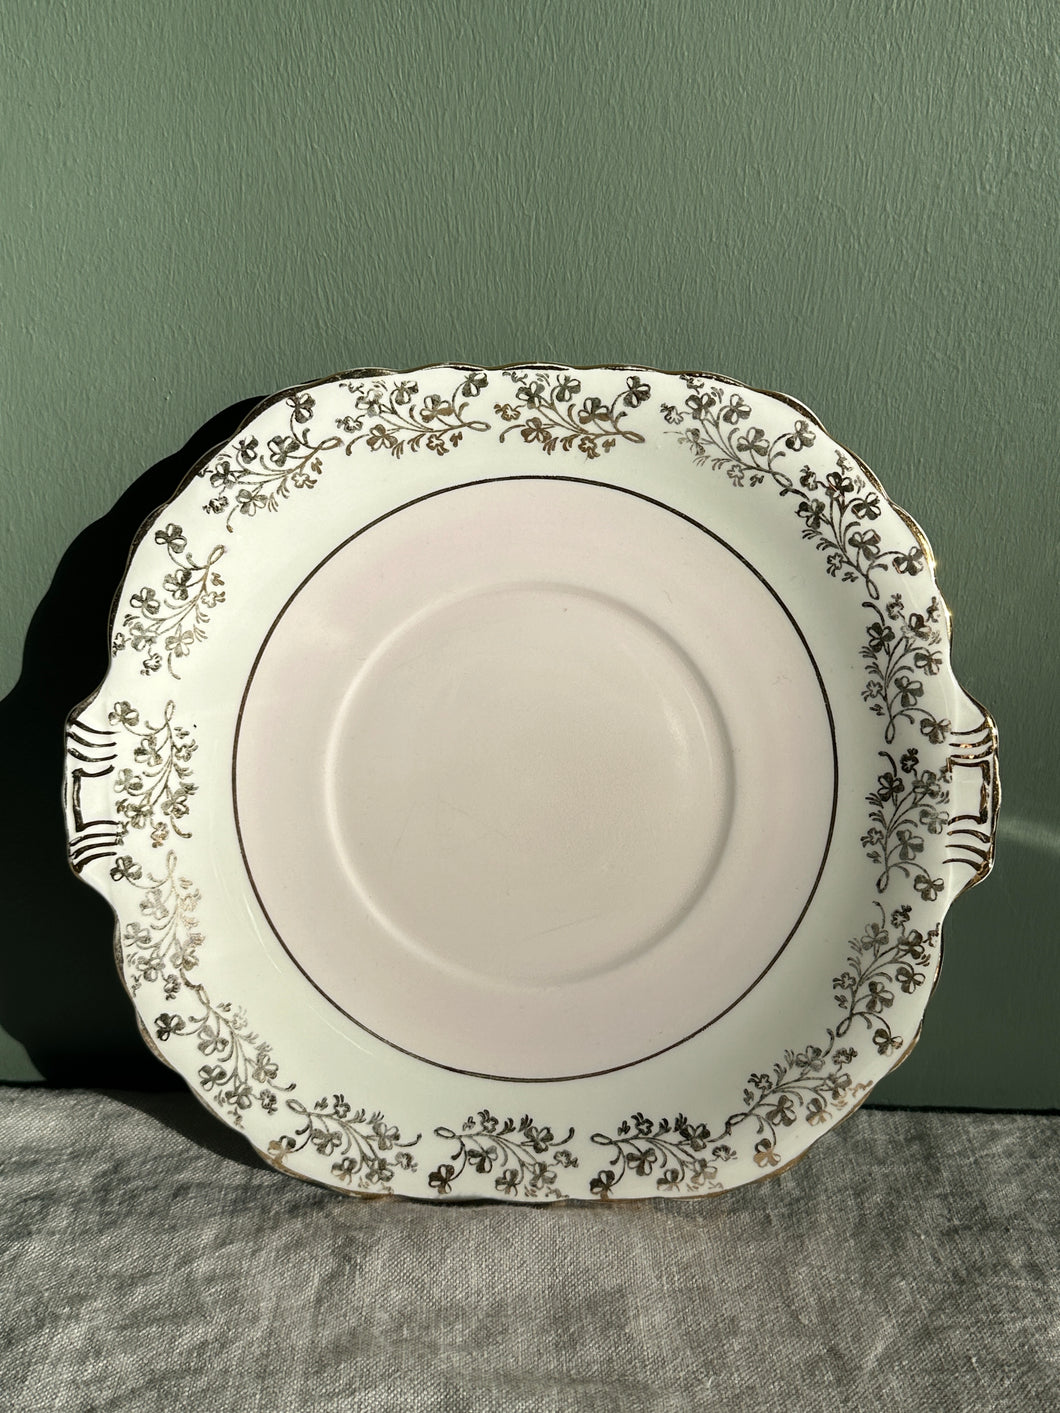 Antique Pink Gold and White Art Deco Plate